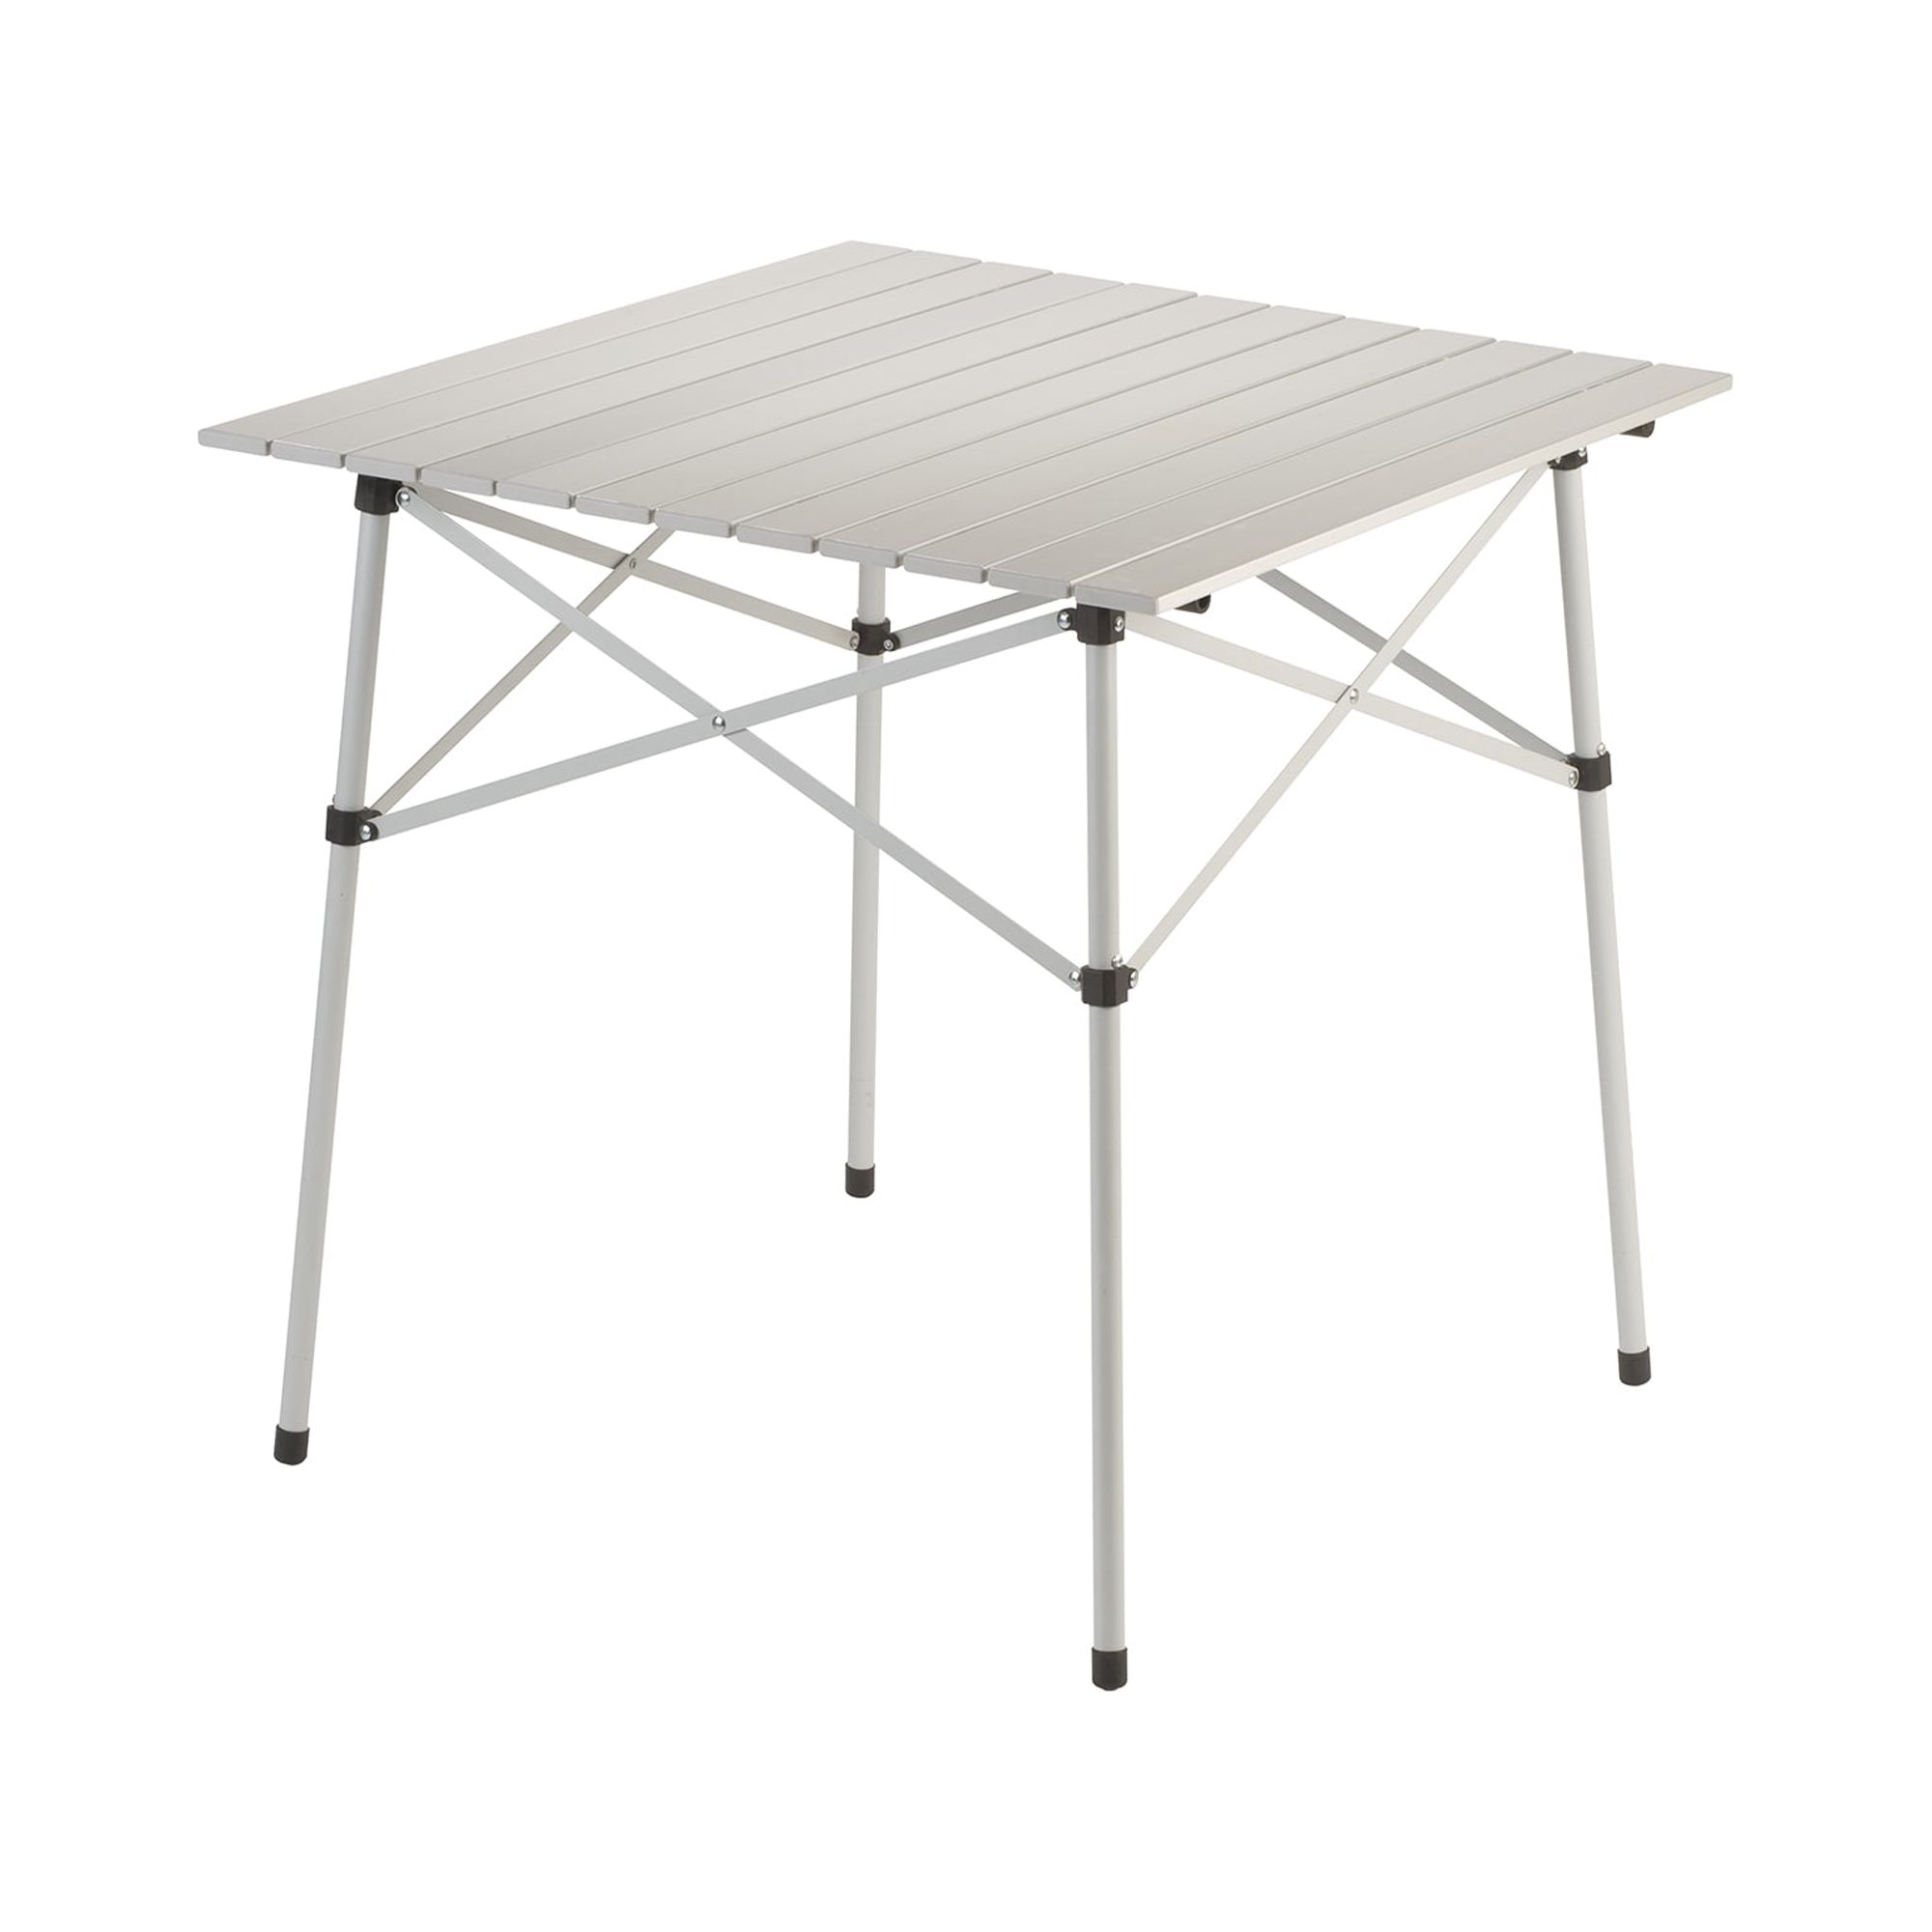 Coleman Compact 27.6" W x 27.6" L Roll-Top Aluminum Adult Camping Table, Silver - image 1 of 6